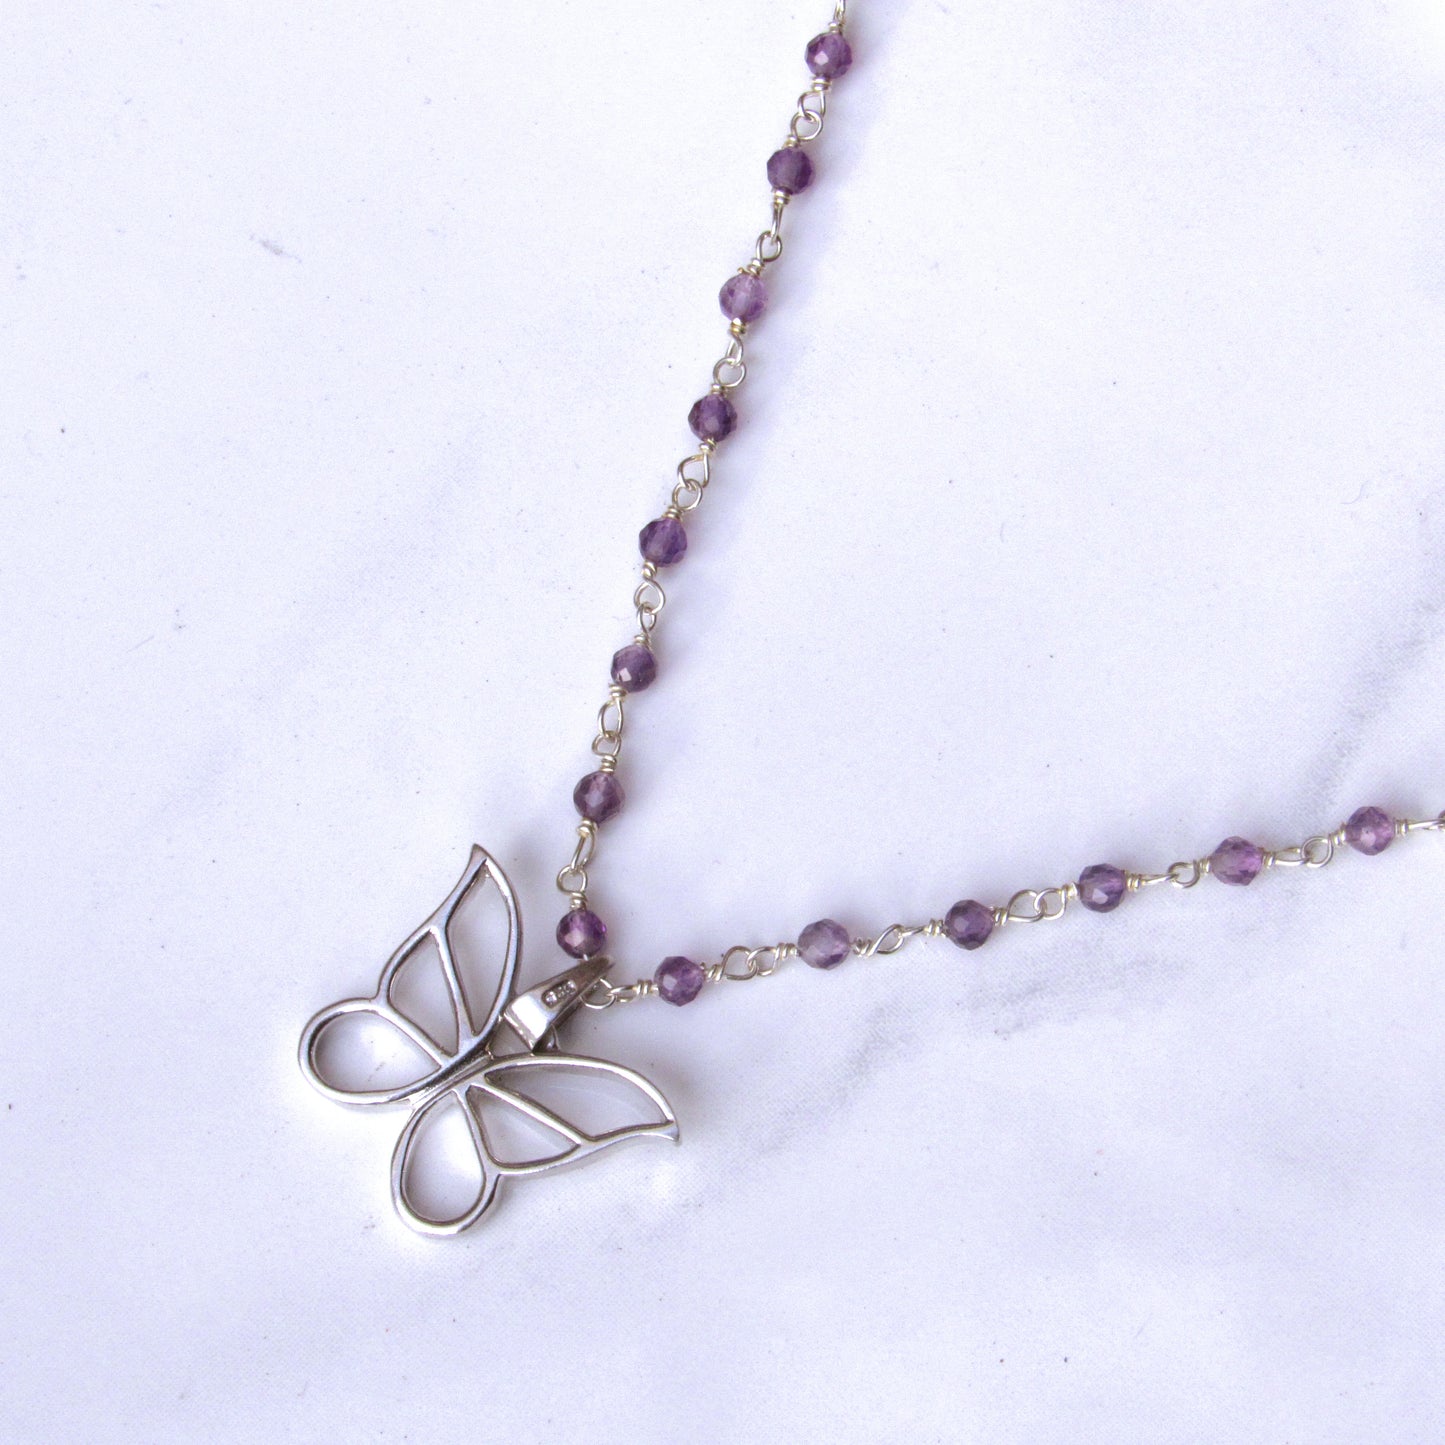 Sterling Silver Wrapped Amethyst gemstone Beads with Sterling Silver Butterfly Pendant